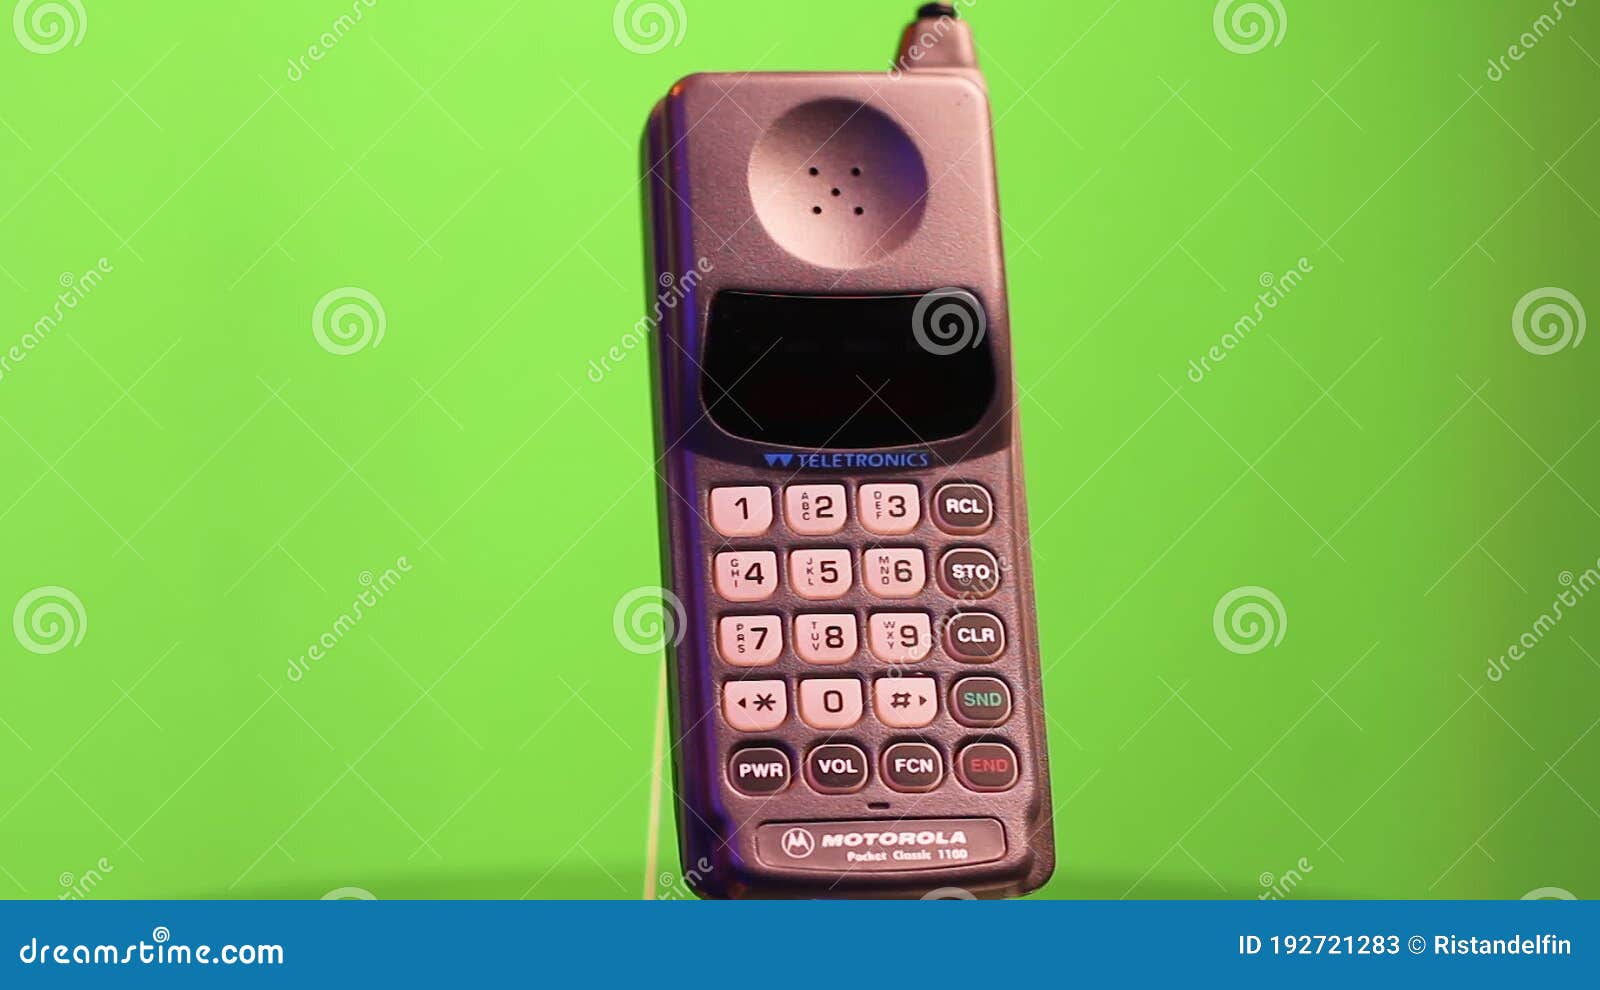 Motorola Pocket Classic 1100 GSM Mobile Telephone on Green Screen  Background Stock Video - Video of communication, microtac: 192721283